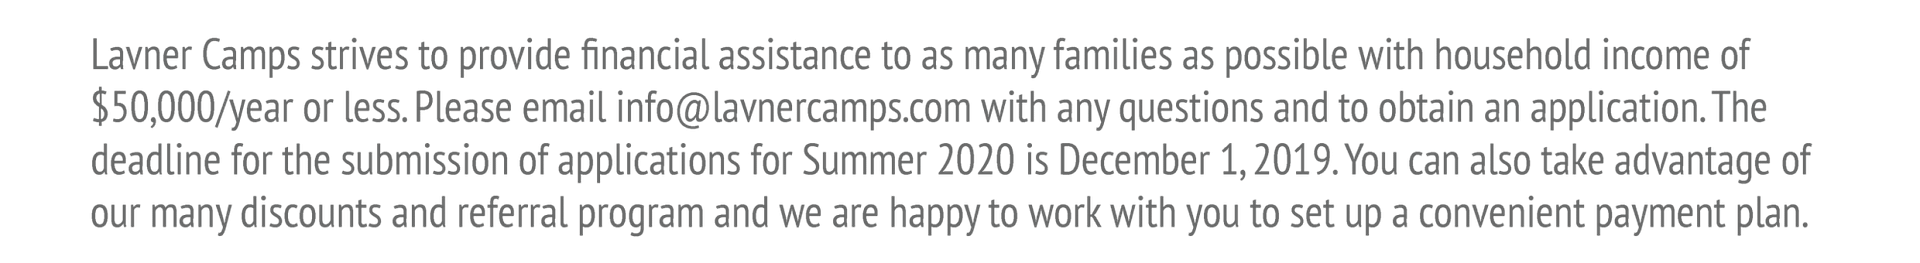 Philadelphia Summer Camps At Penn Lavner Camps 2020 Tech Camps - typical games logo white outline transparent roblox